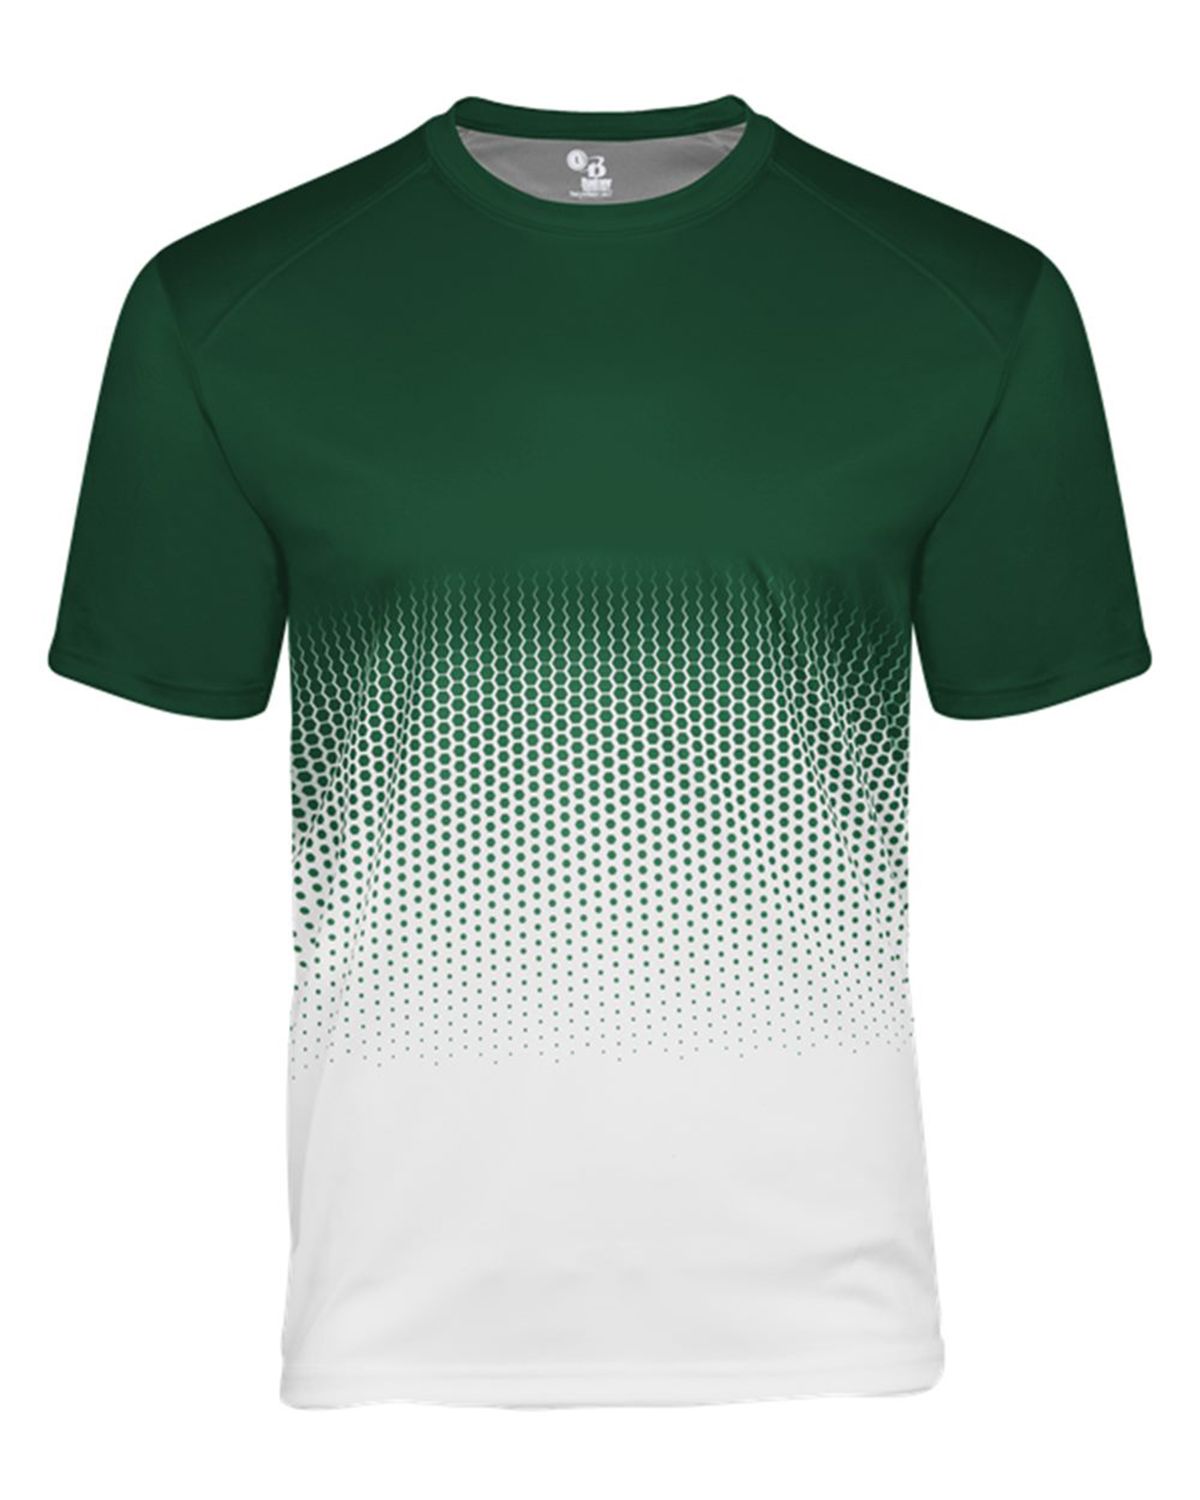 Badger 4220 Hex 2.0 T-Shirt - Free Shipping Available